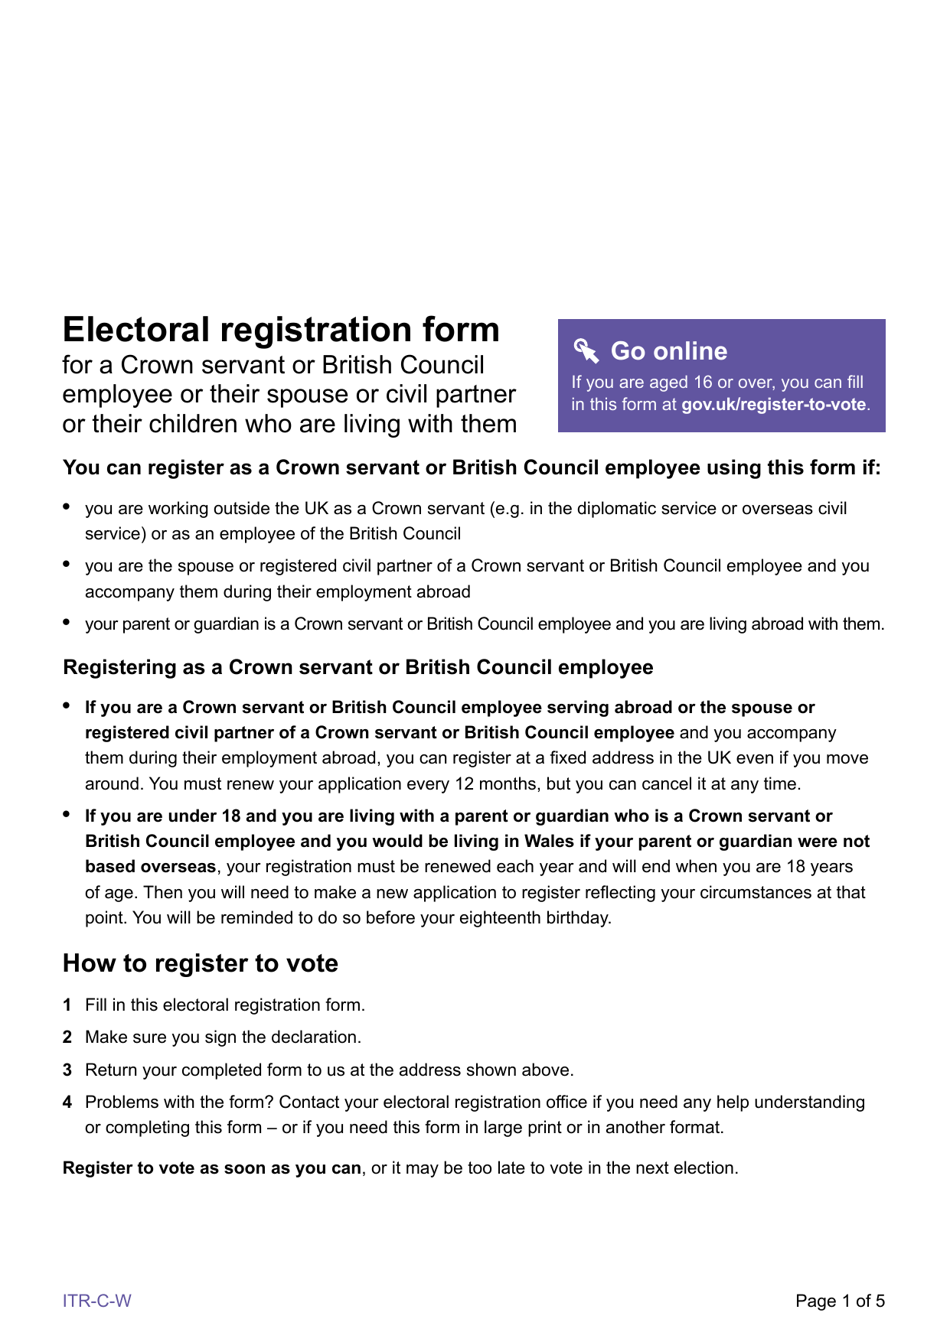 Form ITR-C-W Register to Vote as a Crown Servant or British Council Employee (Resident in Wales) - United Kingdom, Page 1